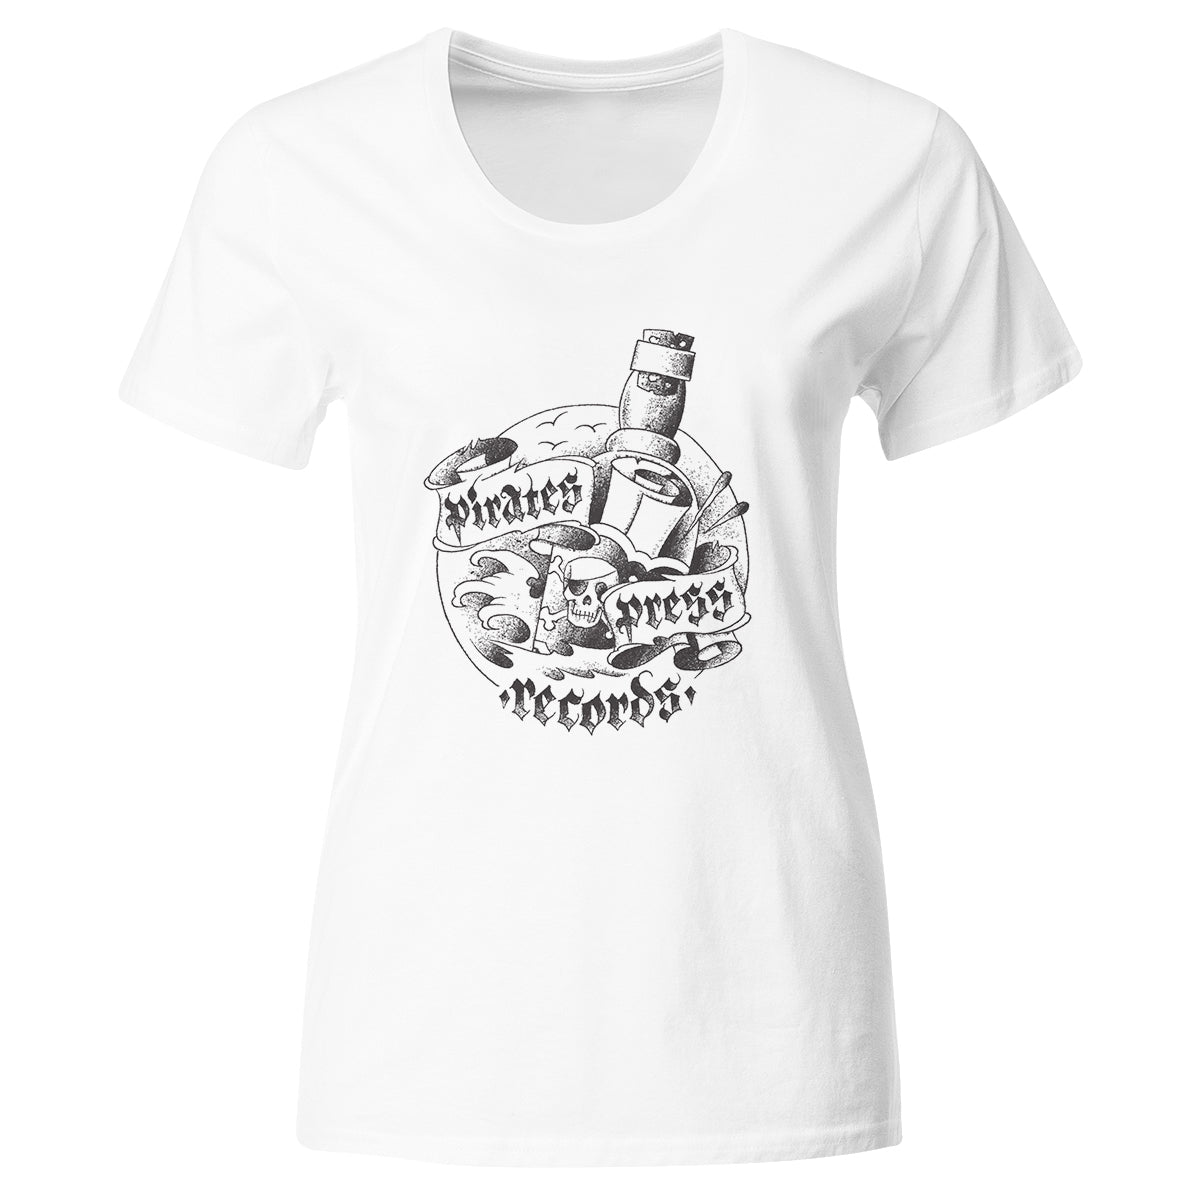 Pirates Press Records - Bottle - Black on White - T-Shirt - Fitted